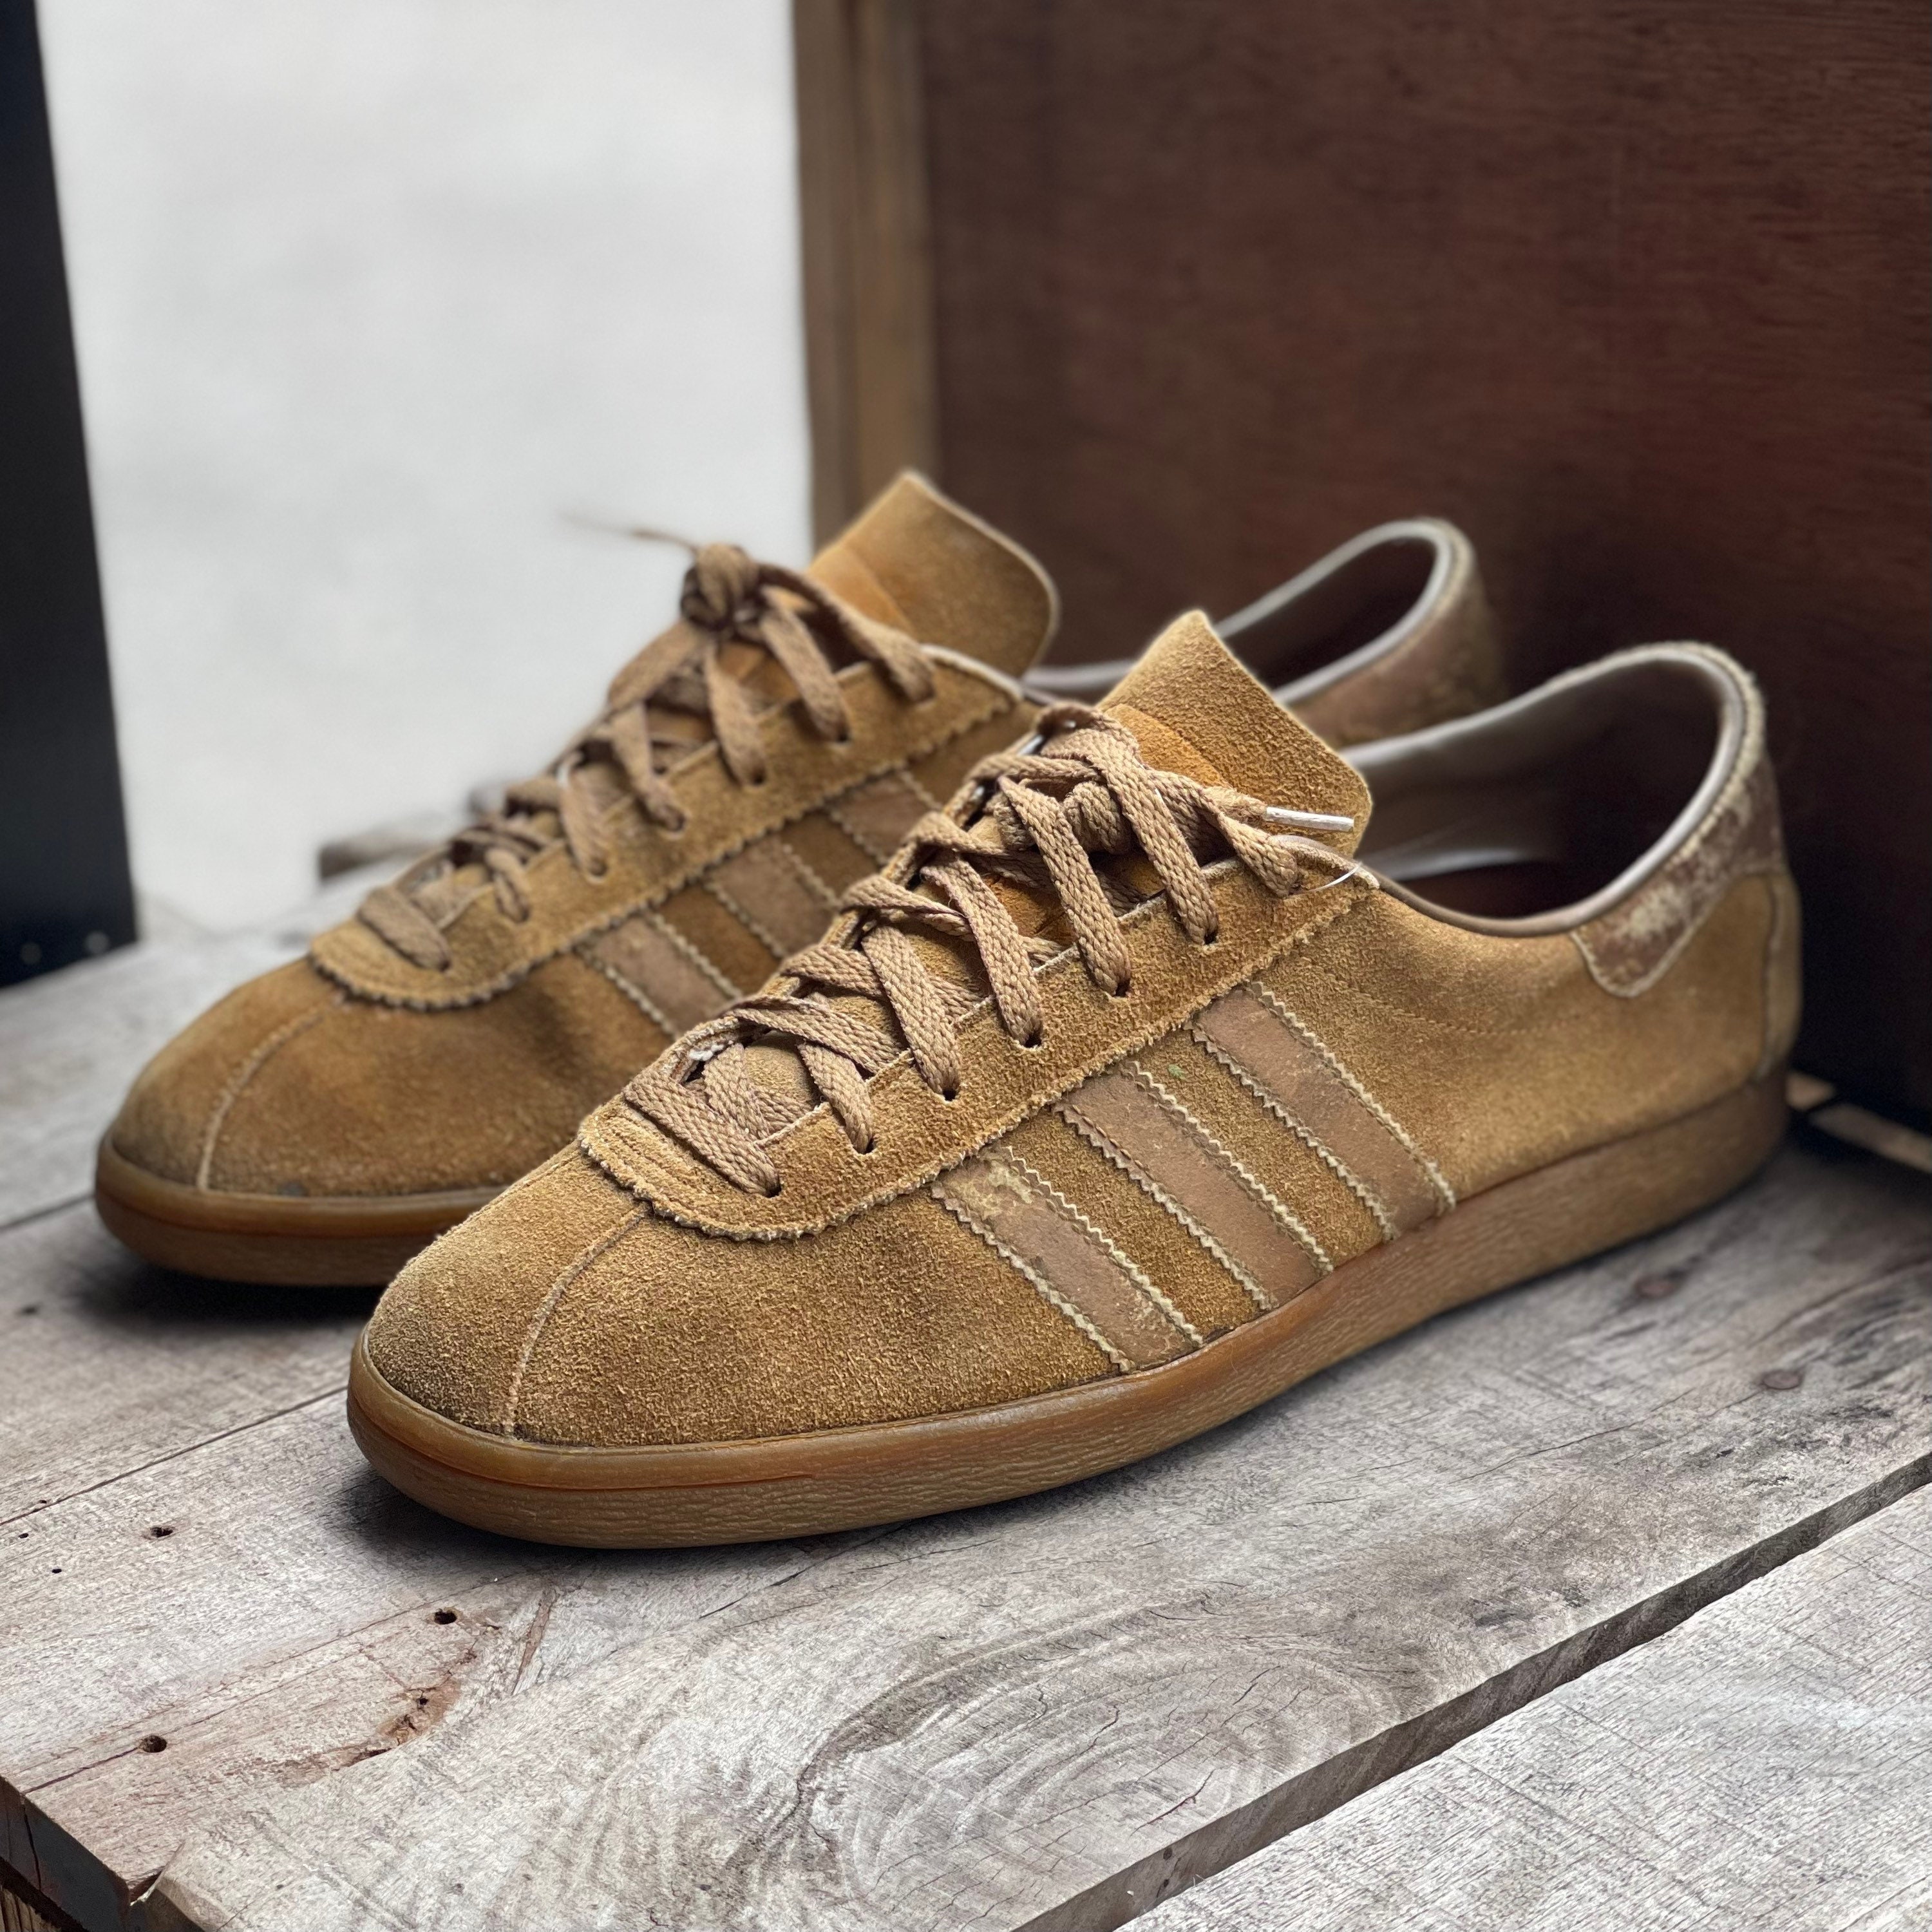 Super Rare Vintage Adidas Tobacco uk7 Made in Canada 70s 80s Leisure  Trainers